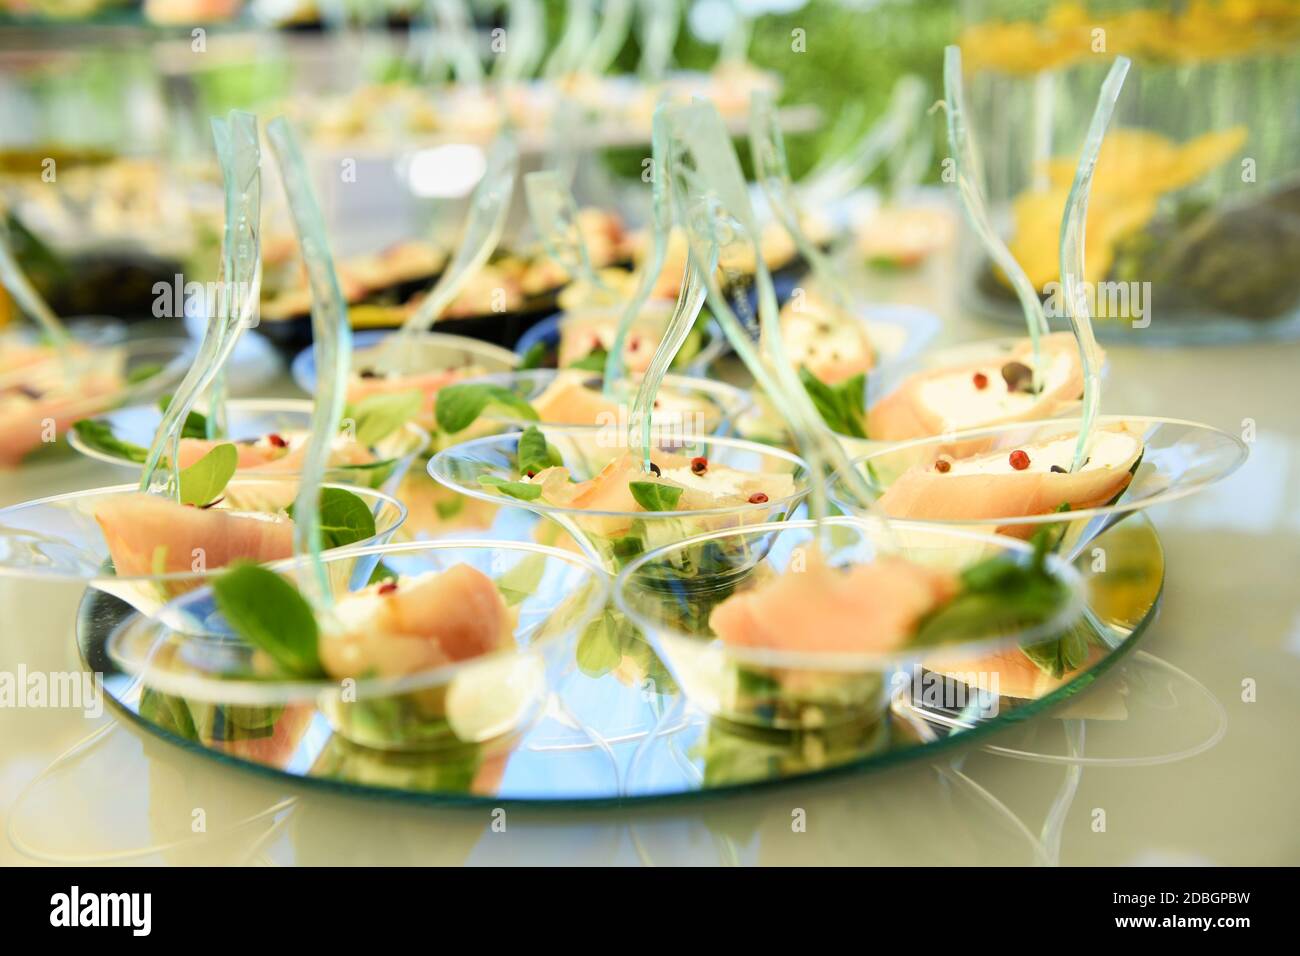 Buffet table with a display of salmon seafood appetizers on circular mirrors in a low angle shallow dof view at a catered event or wedding reception Stock Photo